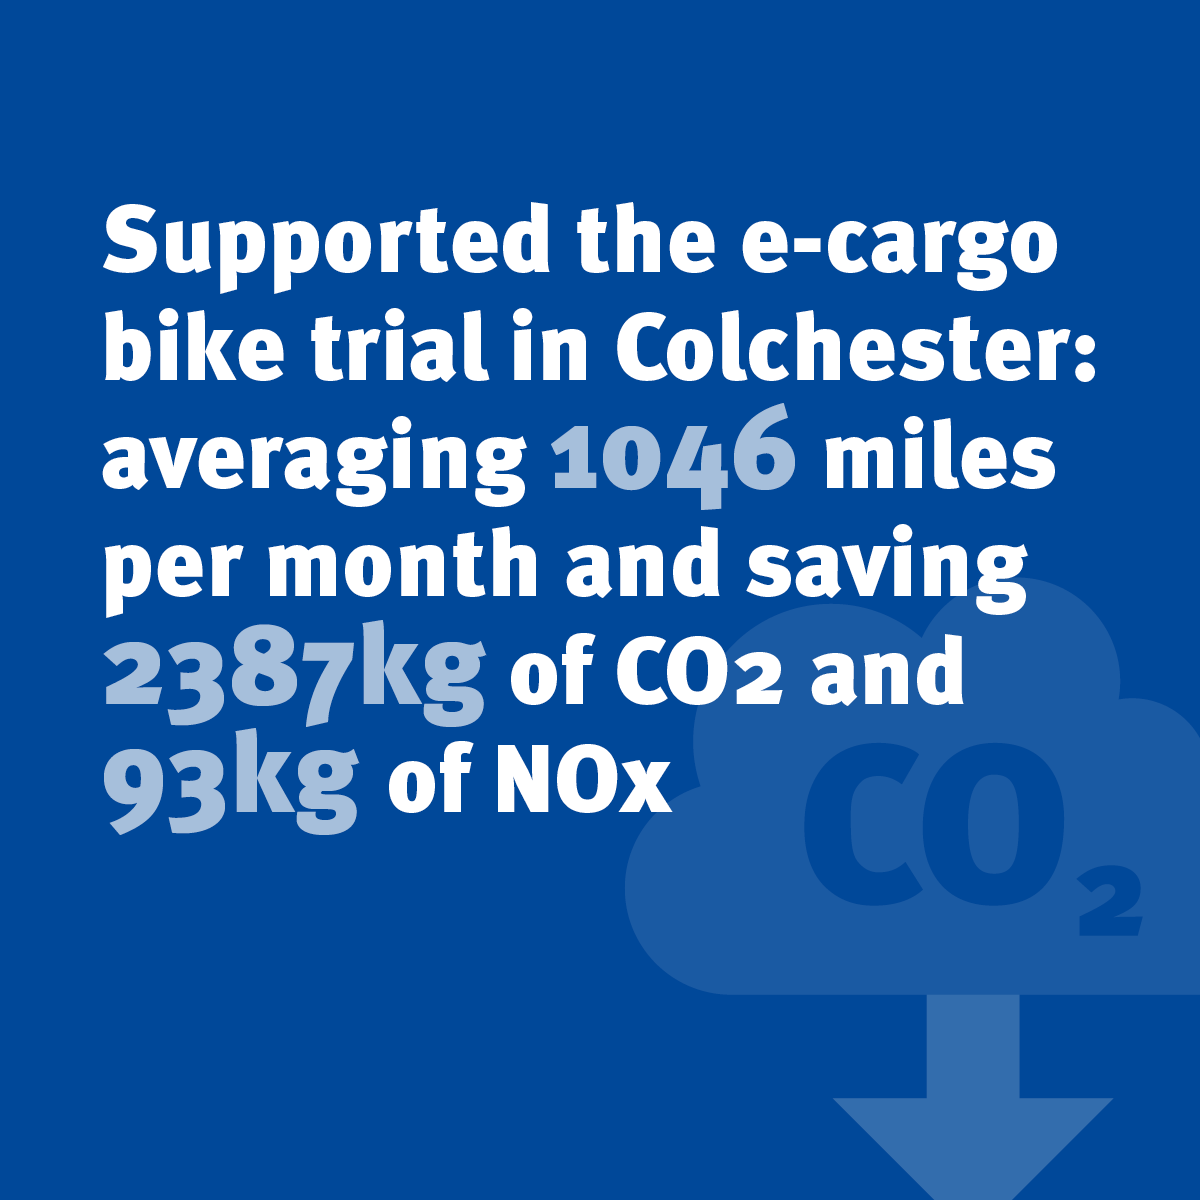 Supported the e-cargo bike trial in Colchester: averaging 1046 miles per month and saving 2387kg of CO2 and 93kg of NOx